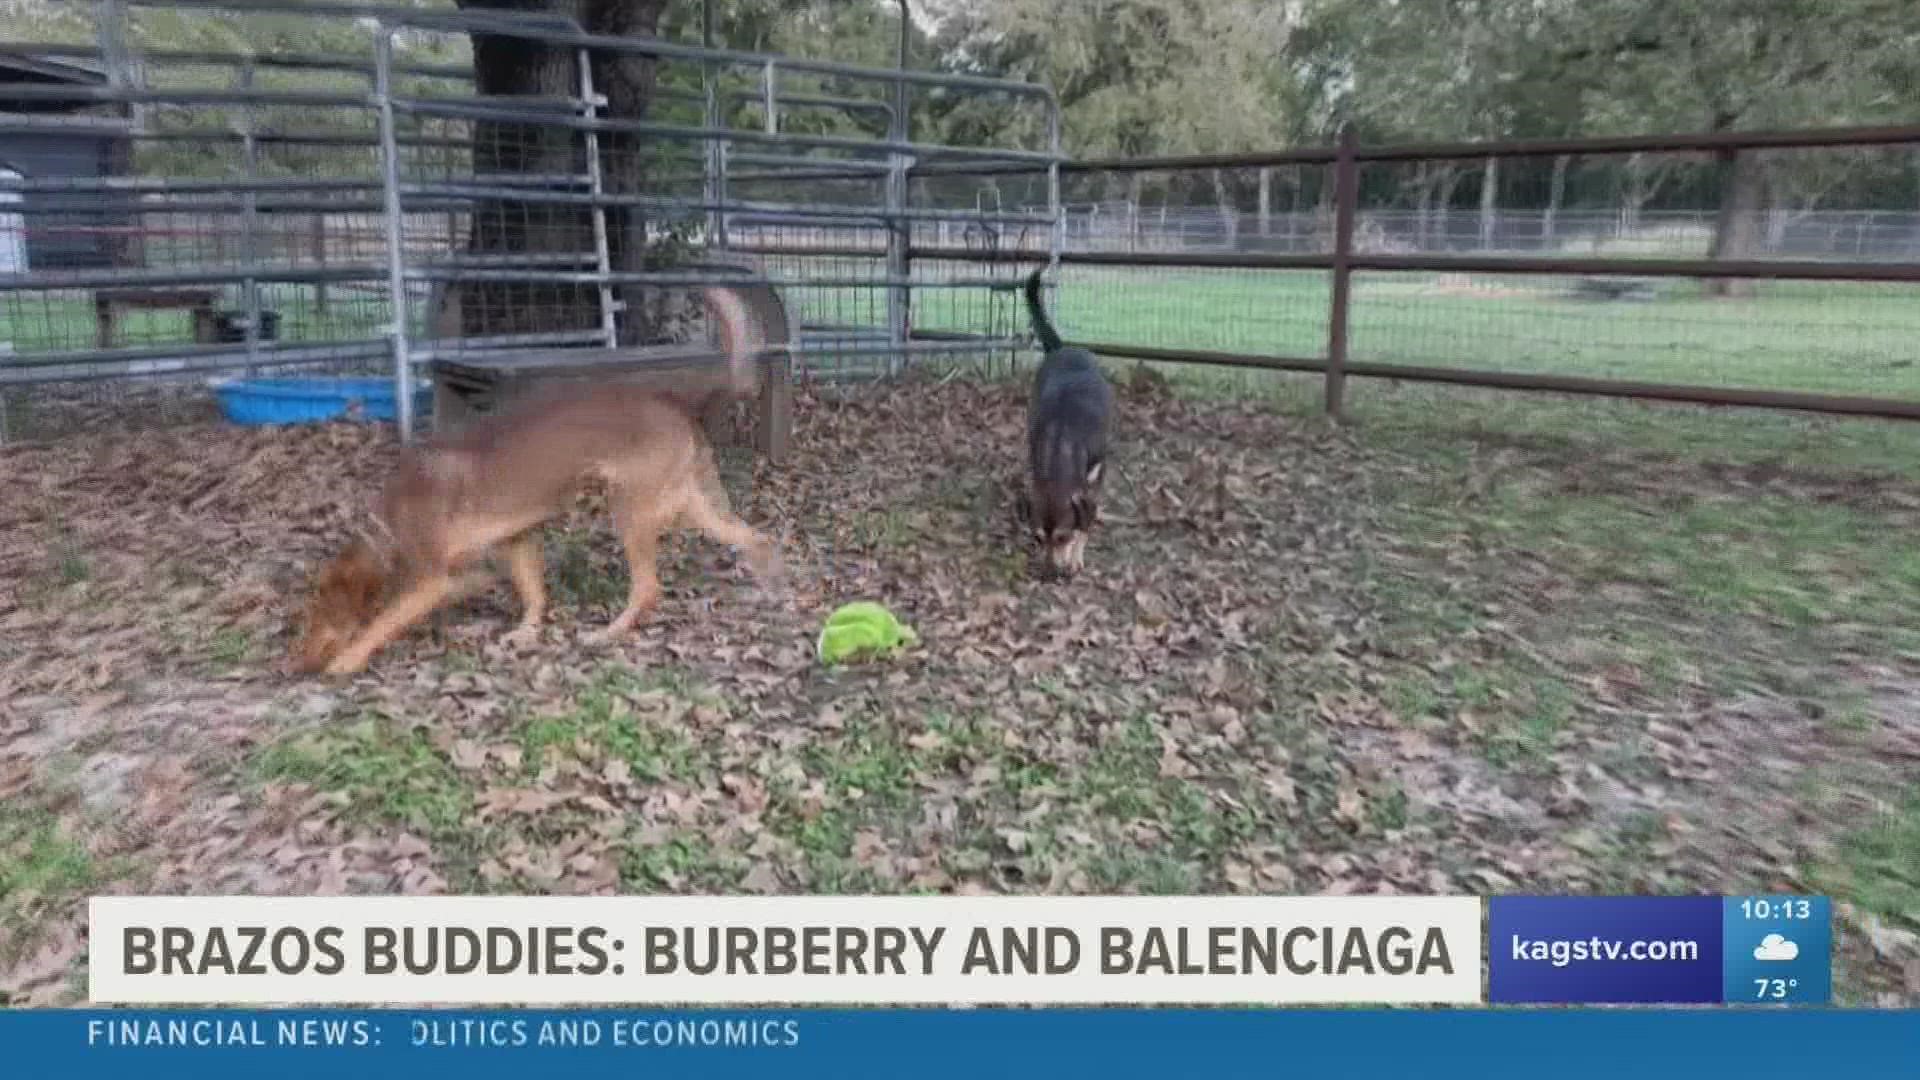 This week's featured Brazos Buddies are Balenciaga and Burberry, two Catahoula mix dogs that are in search of new homes.